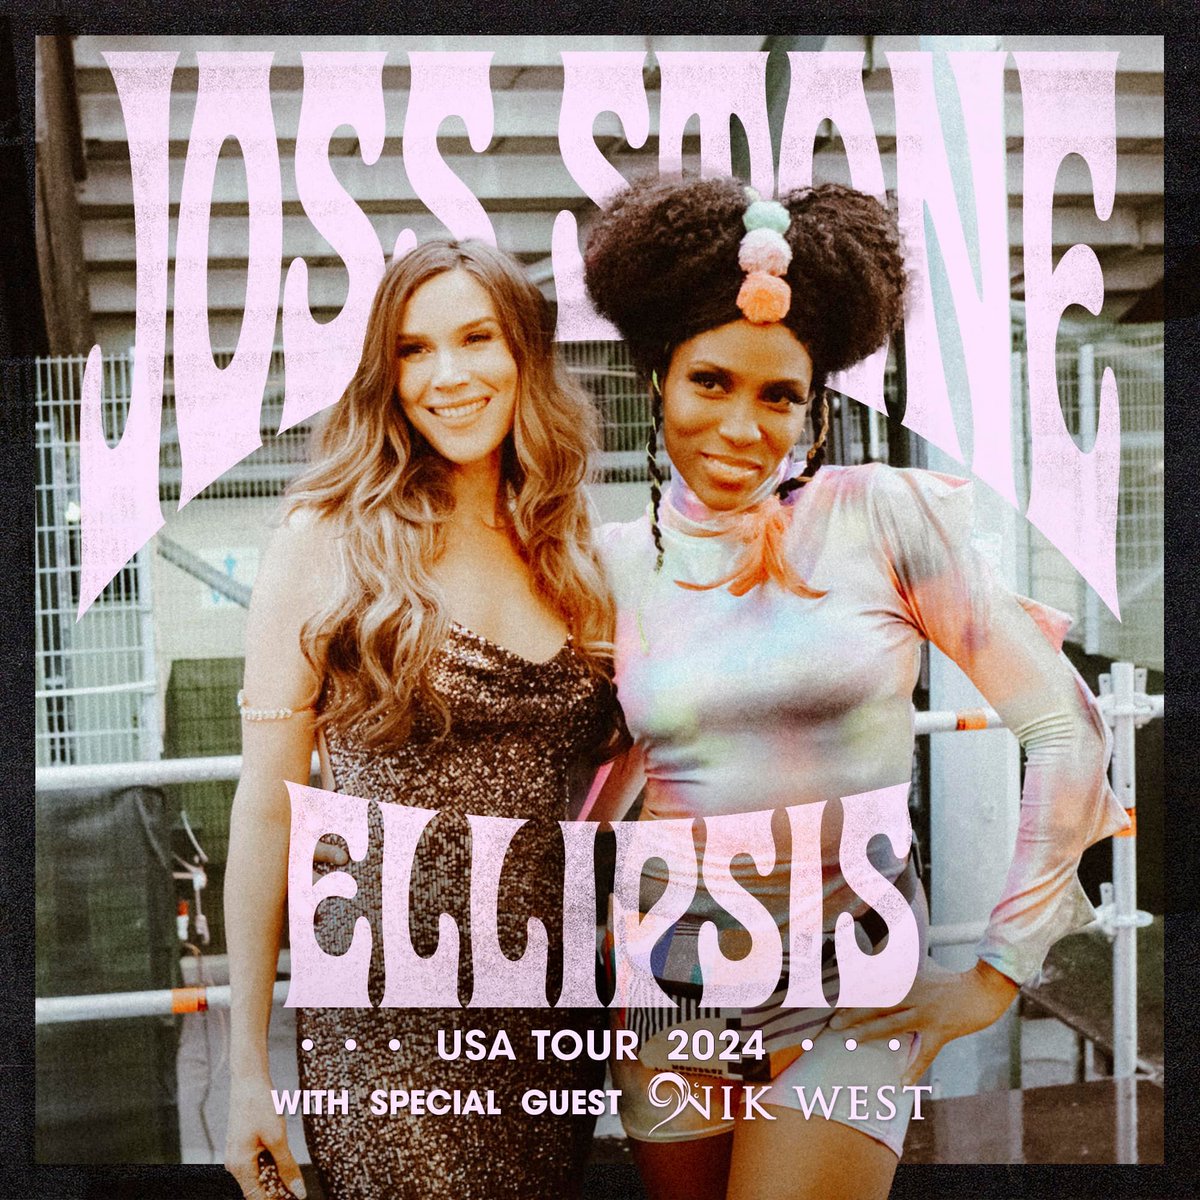 ICYMI: Named “the bass icon of this generation” by Rolling Stone, @NikWestBass has been added as support for @JossStone’s The ELLIPSIS Tour coming to Chrysler Hall on June 5 ➡️ bit.ly/49FGWhT